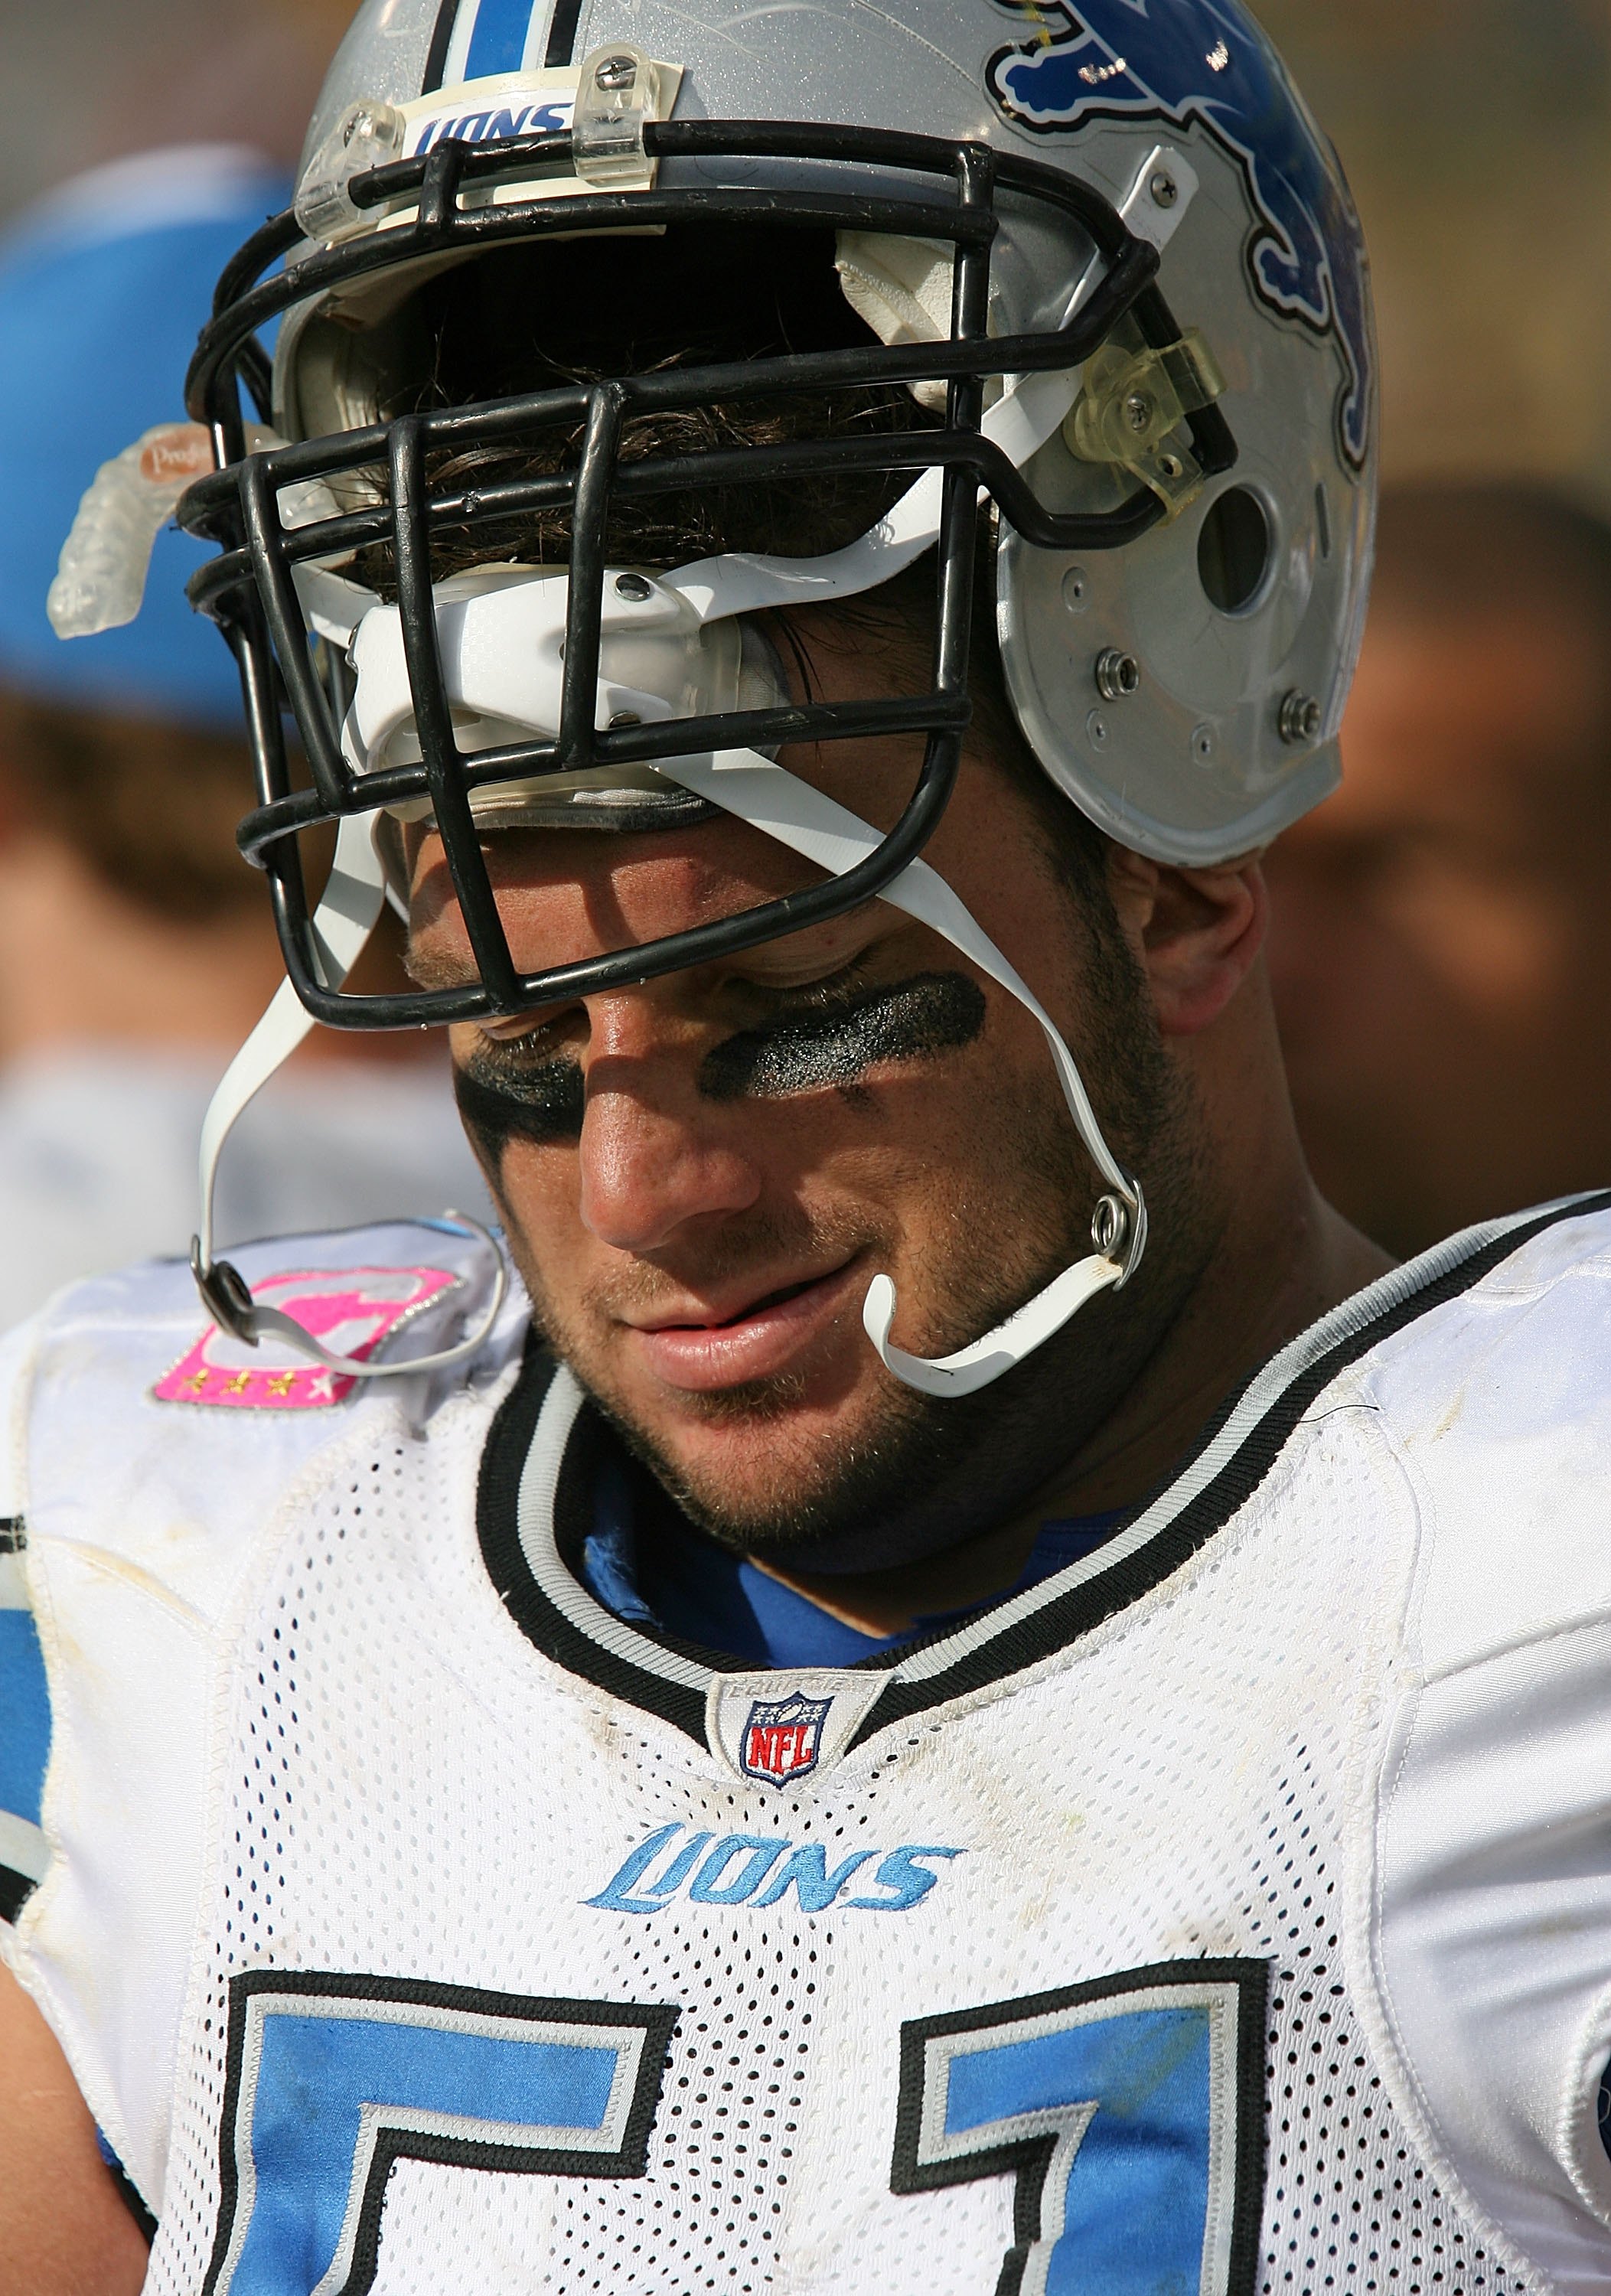 GREEN BAY, WI - OCTOBER 18: Dominic Raiola #51 of the Detroit Lions walks the bench area during a game against the Green Bay Packers at Lambeau Field on October 18, 2009 in Green Bay, Wisconsin. The Packers defeated the Lions 26-0. (Photo by Jonathan Dani